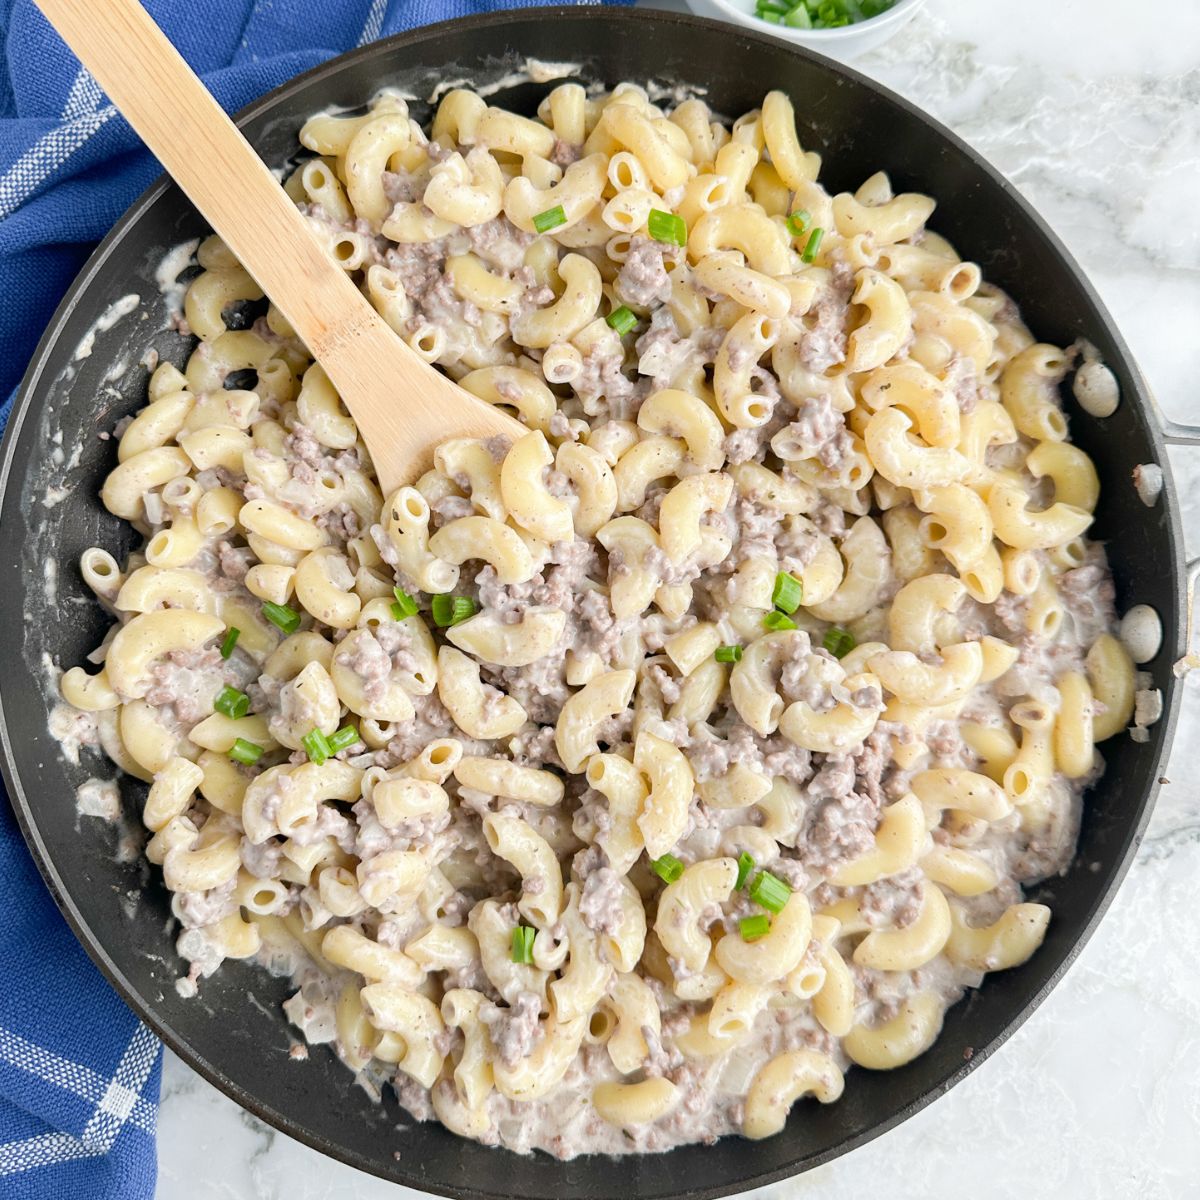 Skillet with pasta, ground beef, and cream sauce.